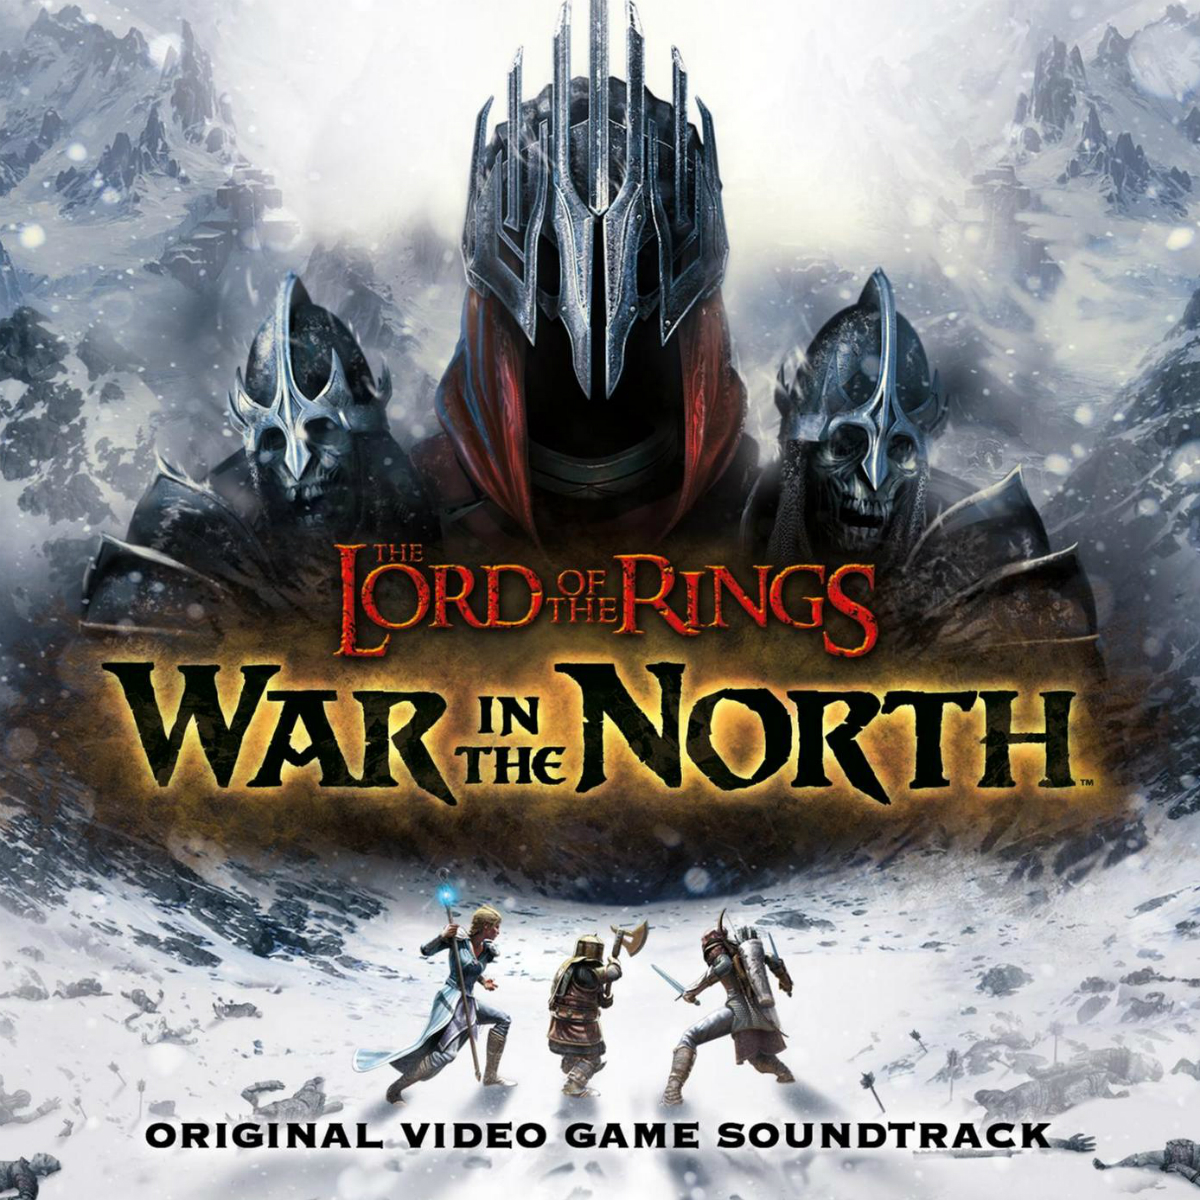 The_Lord_of_the_Rings__War_in_the_North_Original_Video_Game_Soundtrack__cover1200x1200.jpg